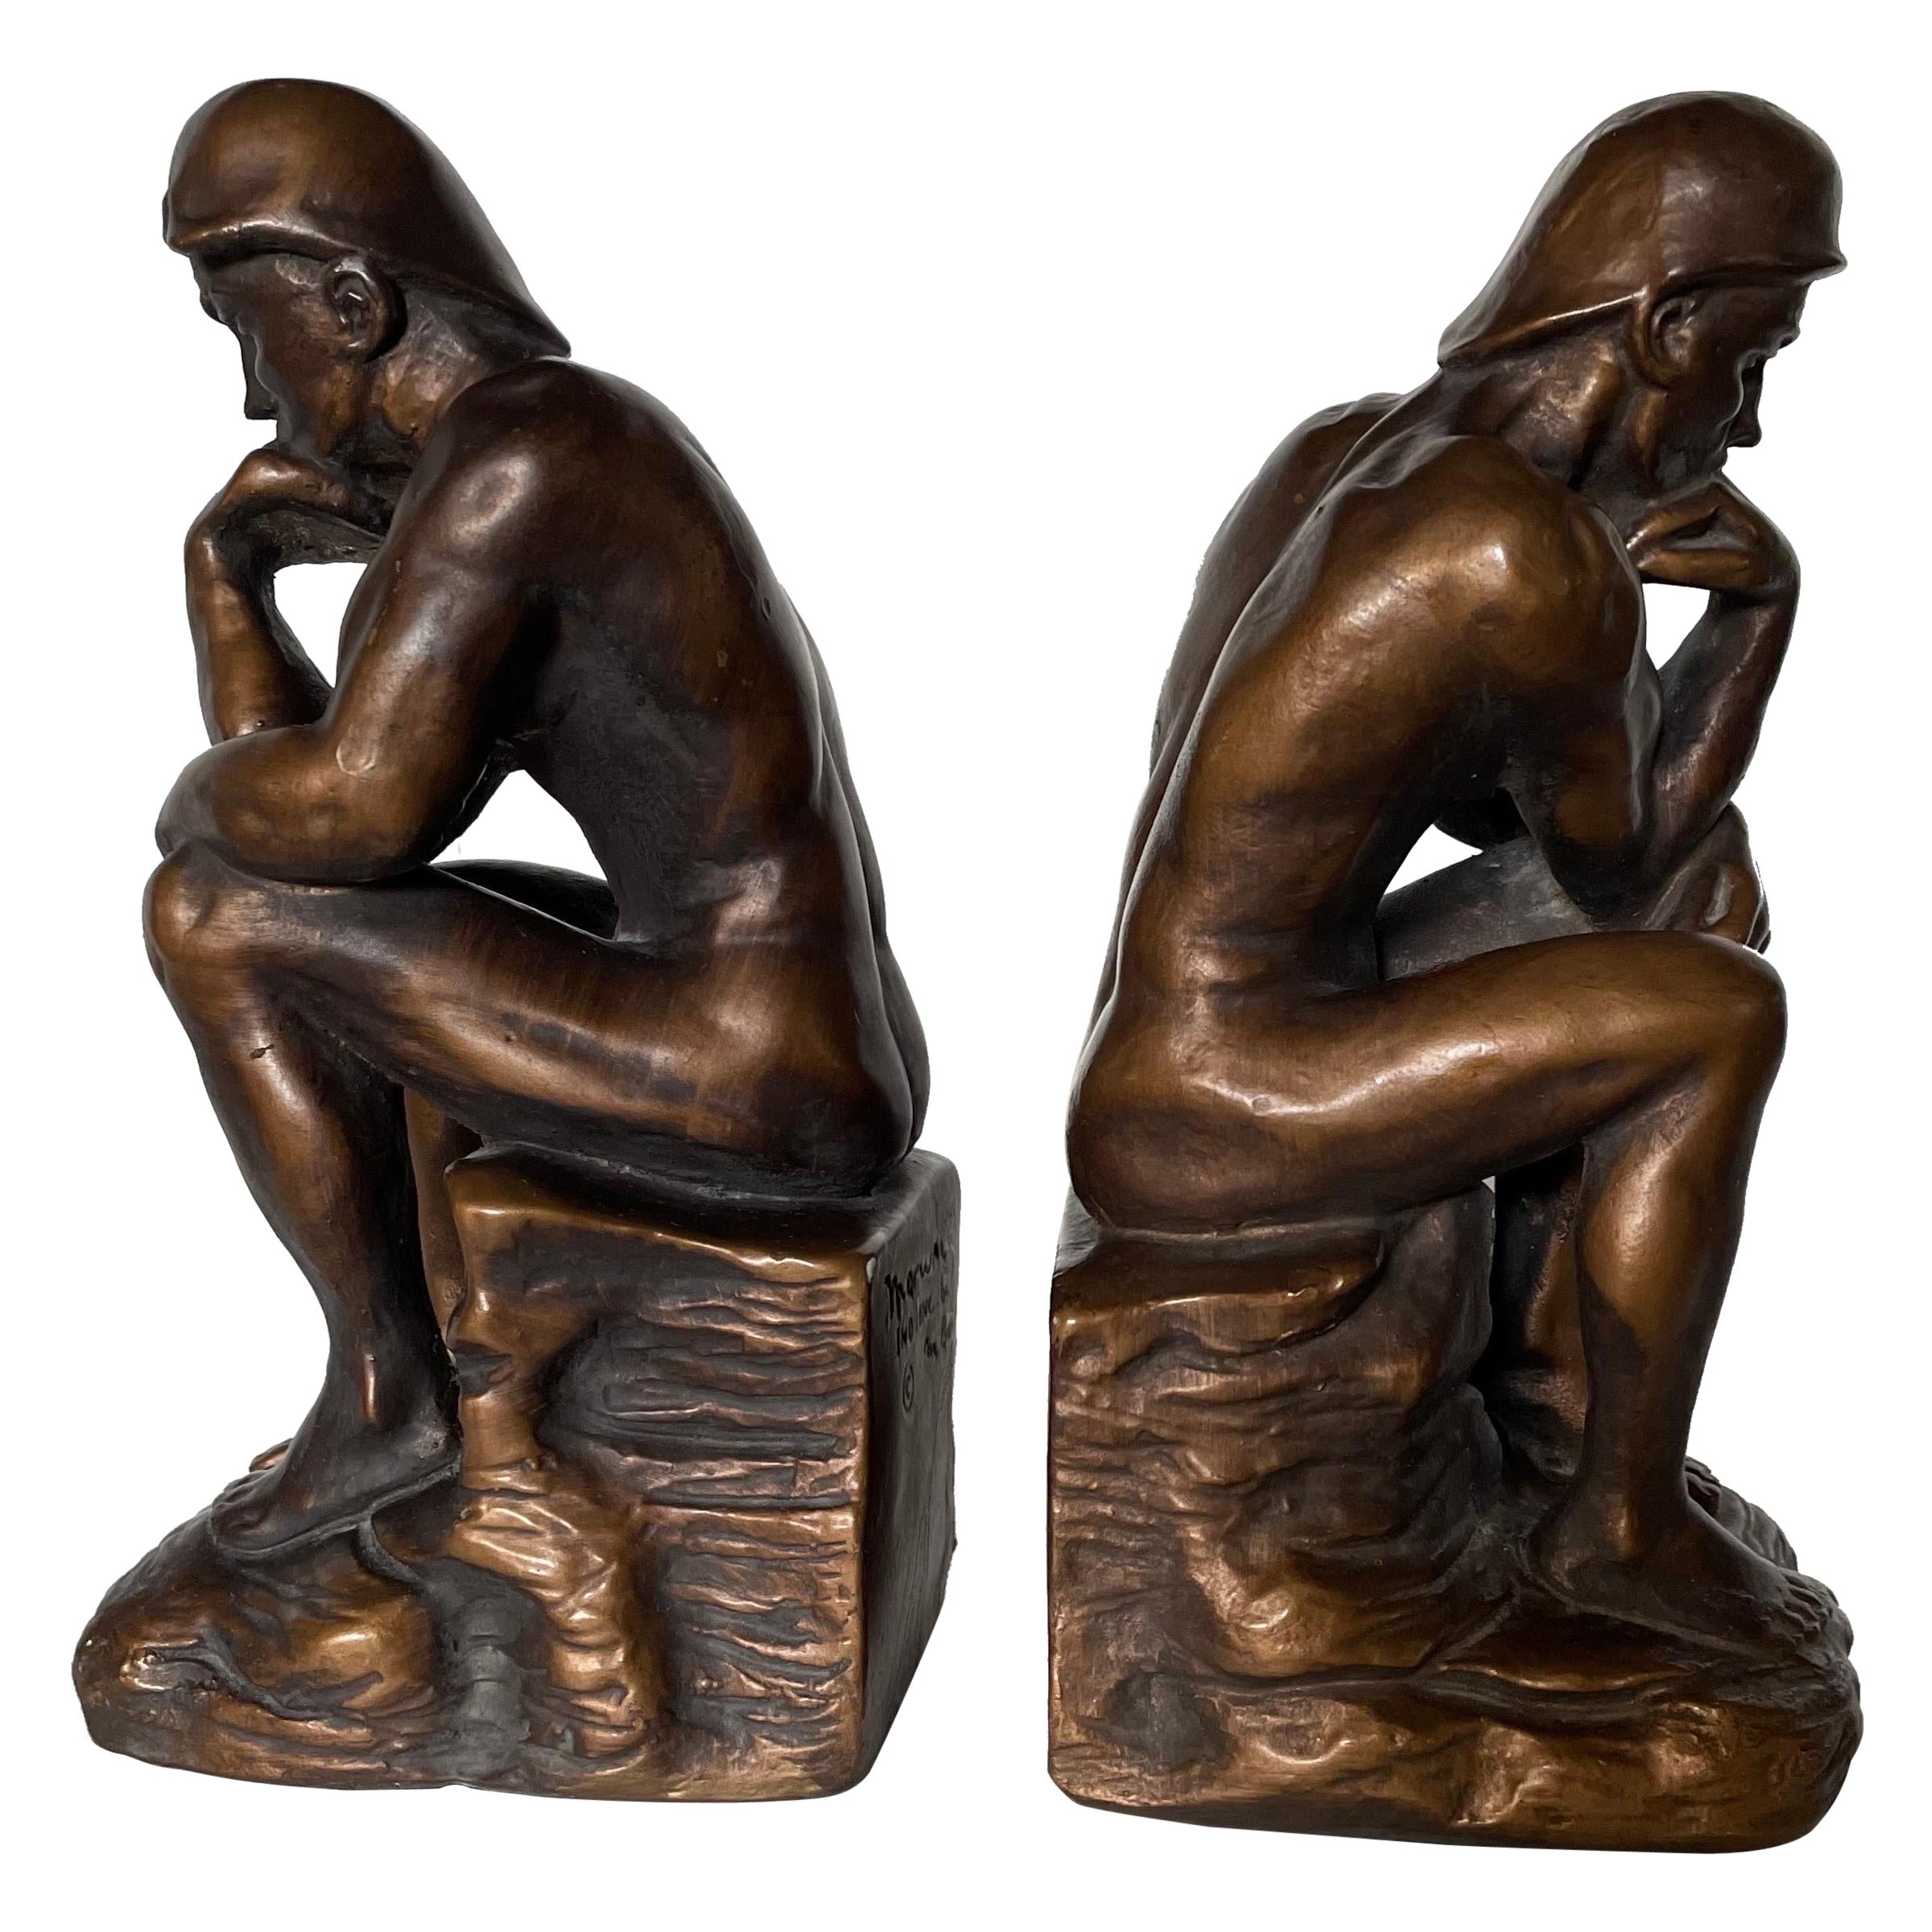 Pair of Antique Male Nude Figural Bookends - the Thinker, 1960s For Sale